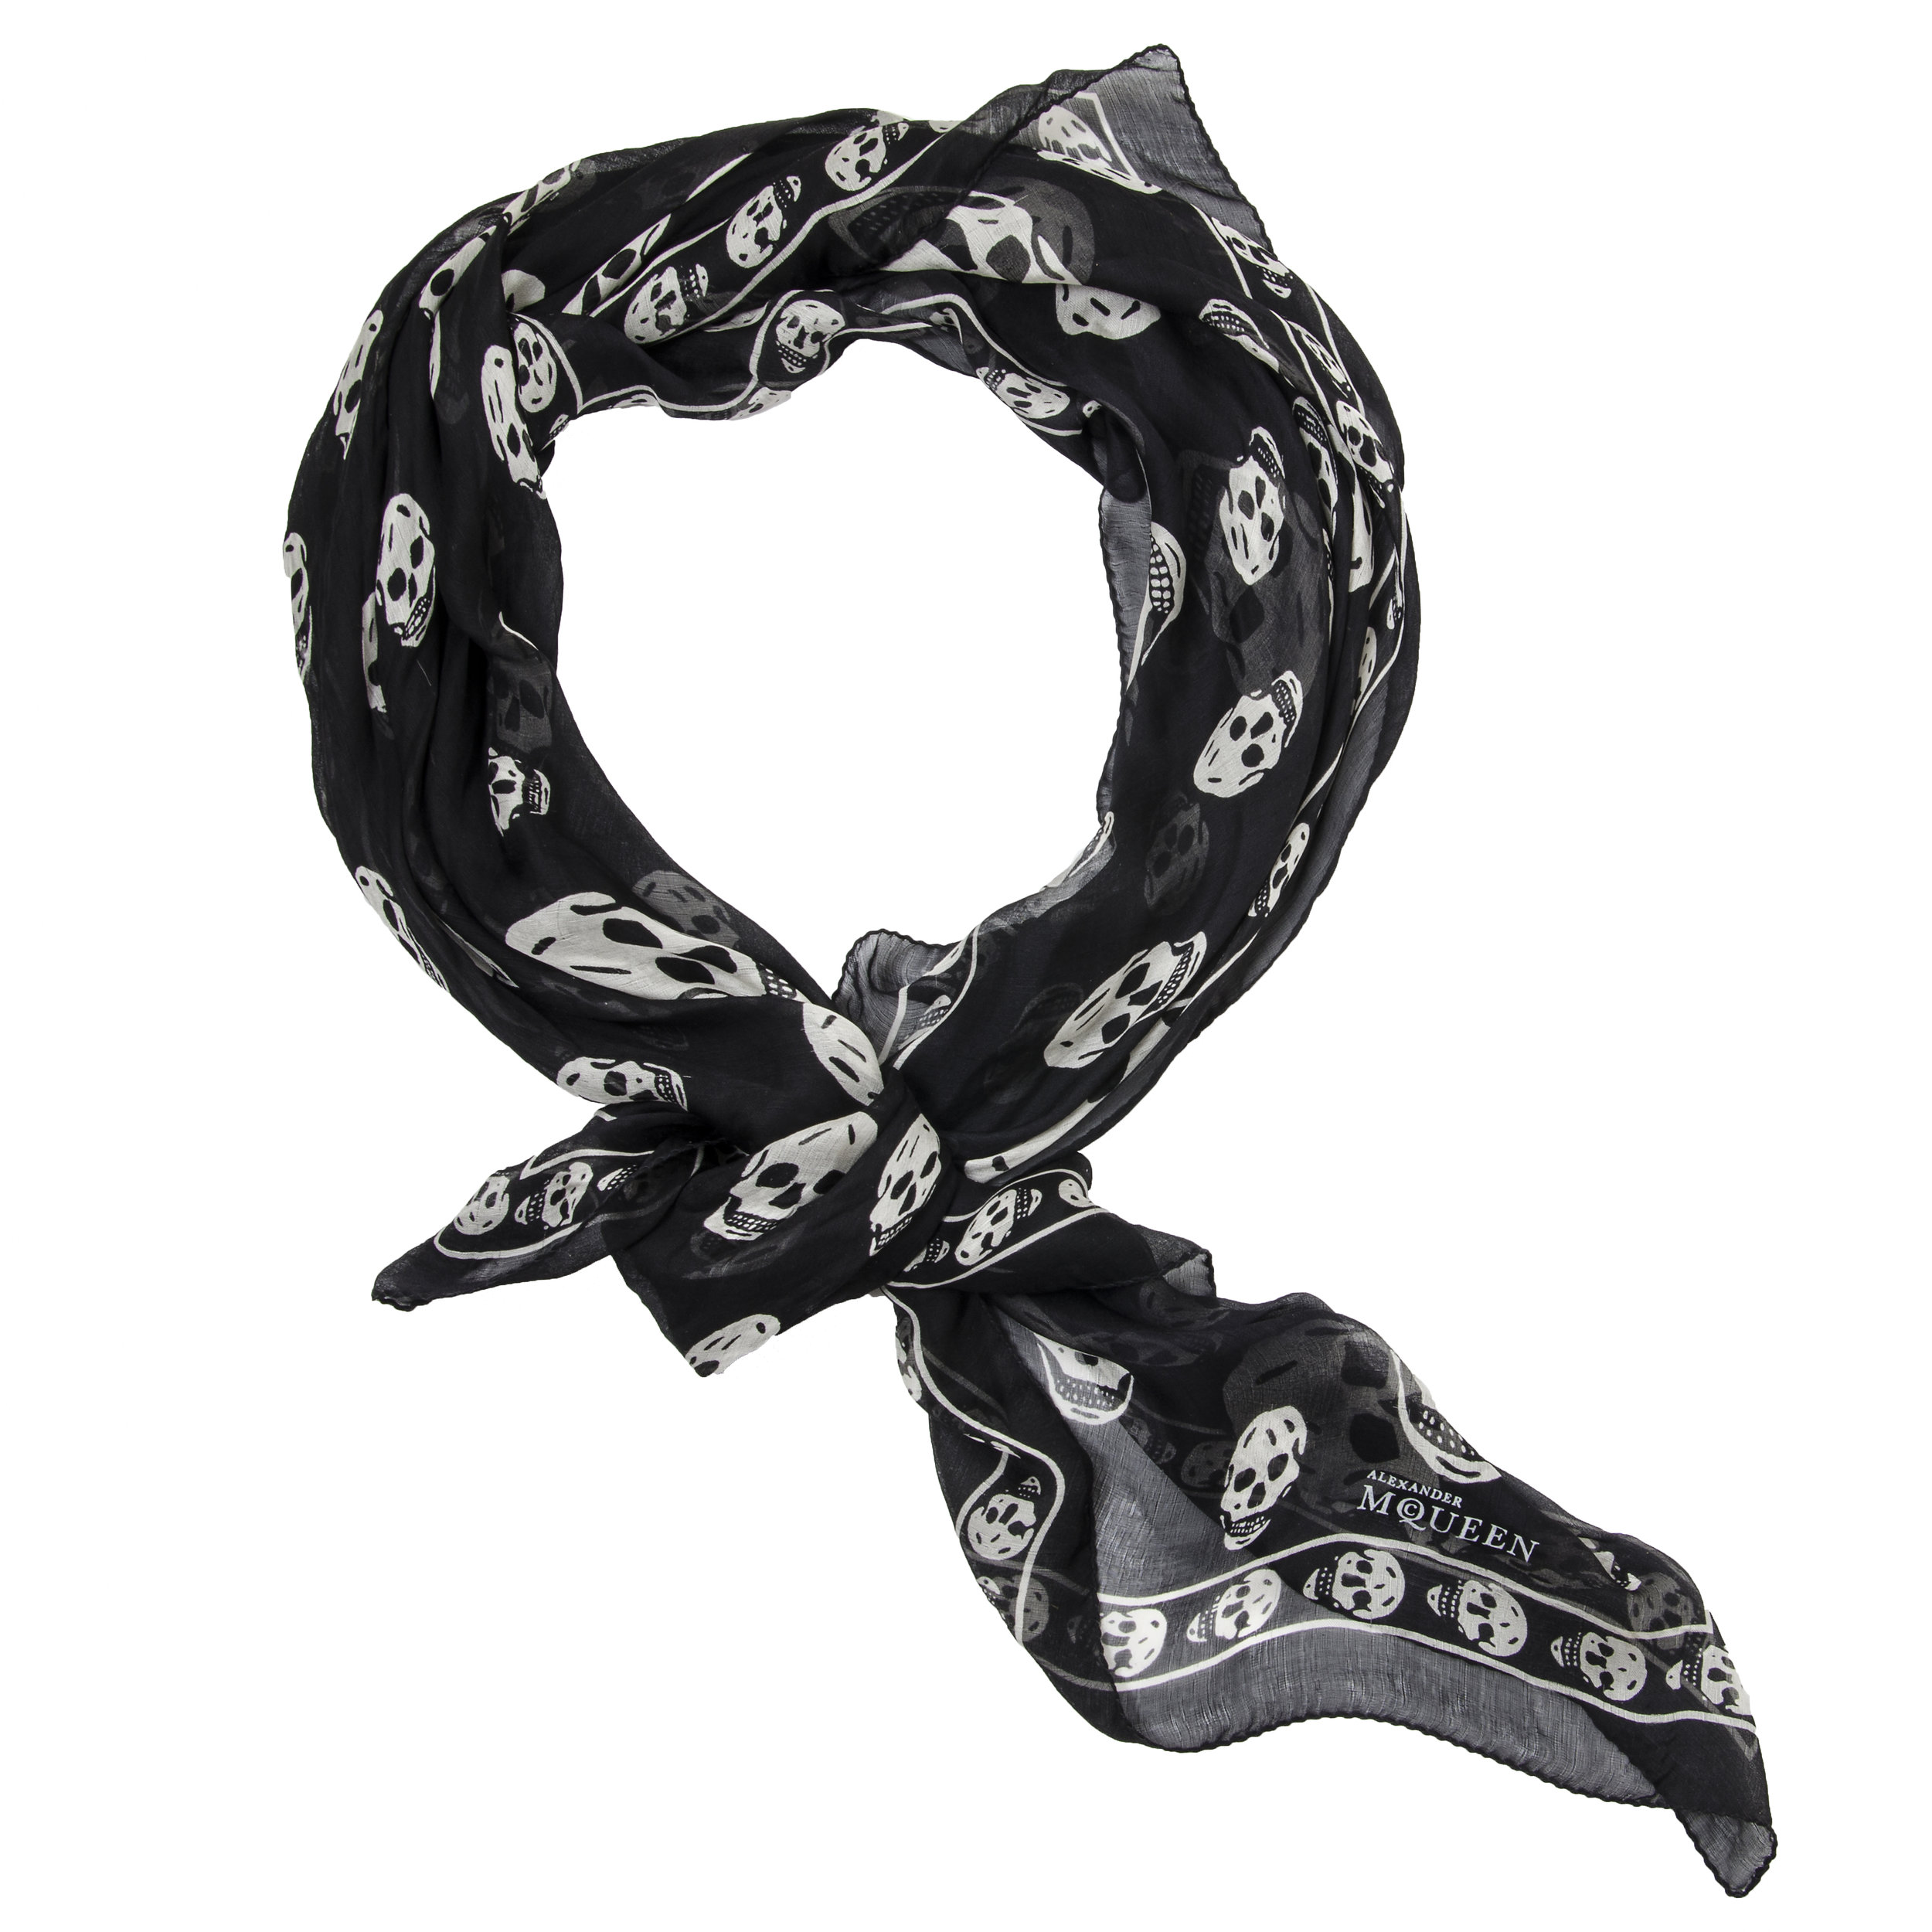 McQueen Scarf - photo by Andrew Werner.jpg